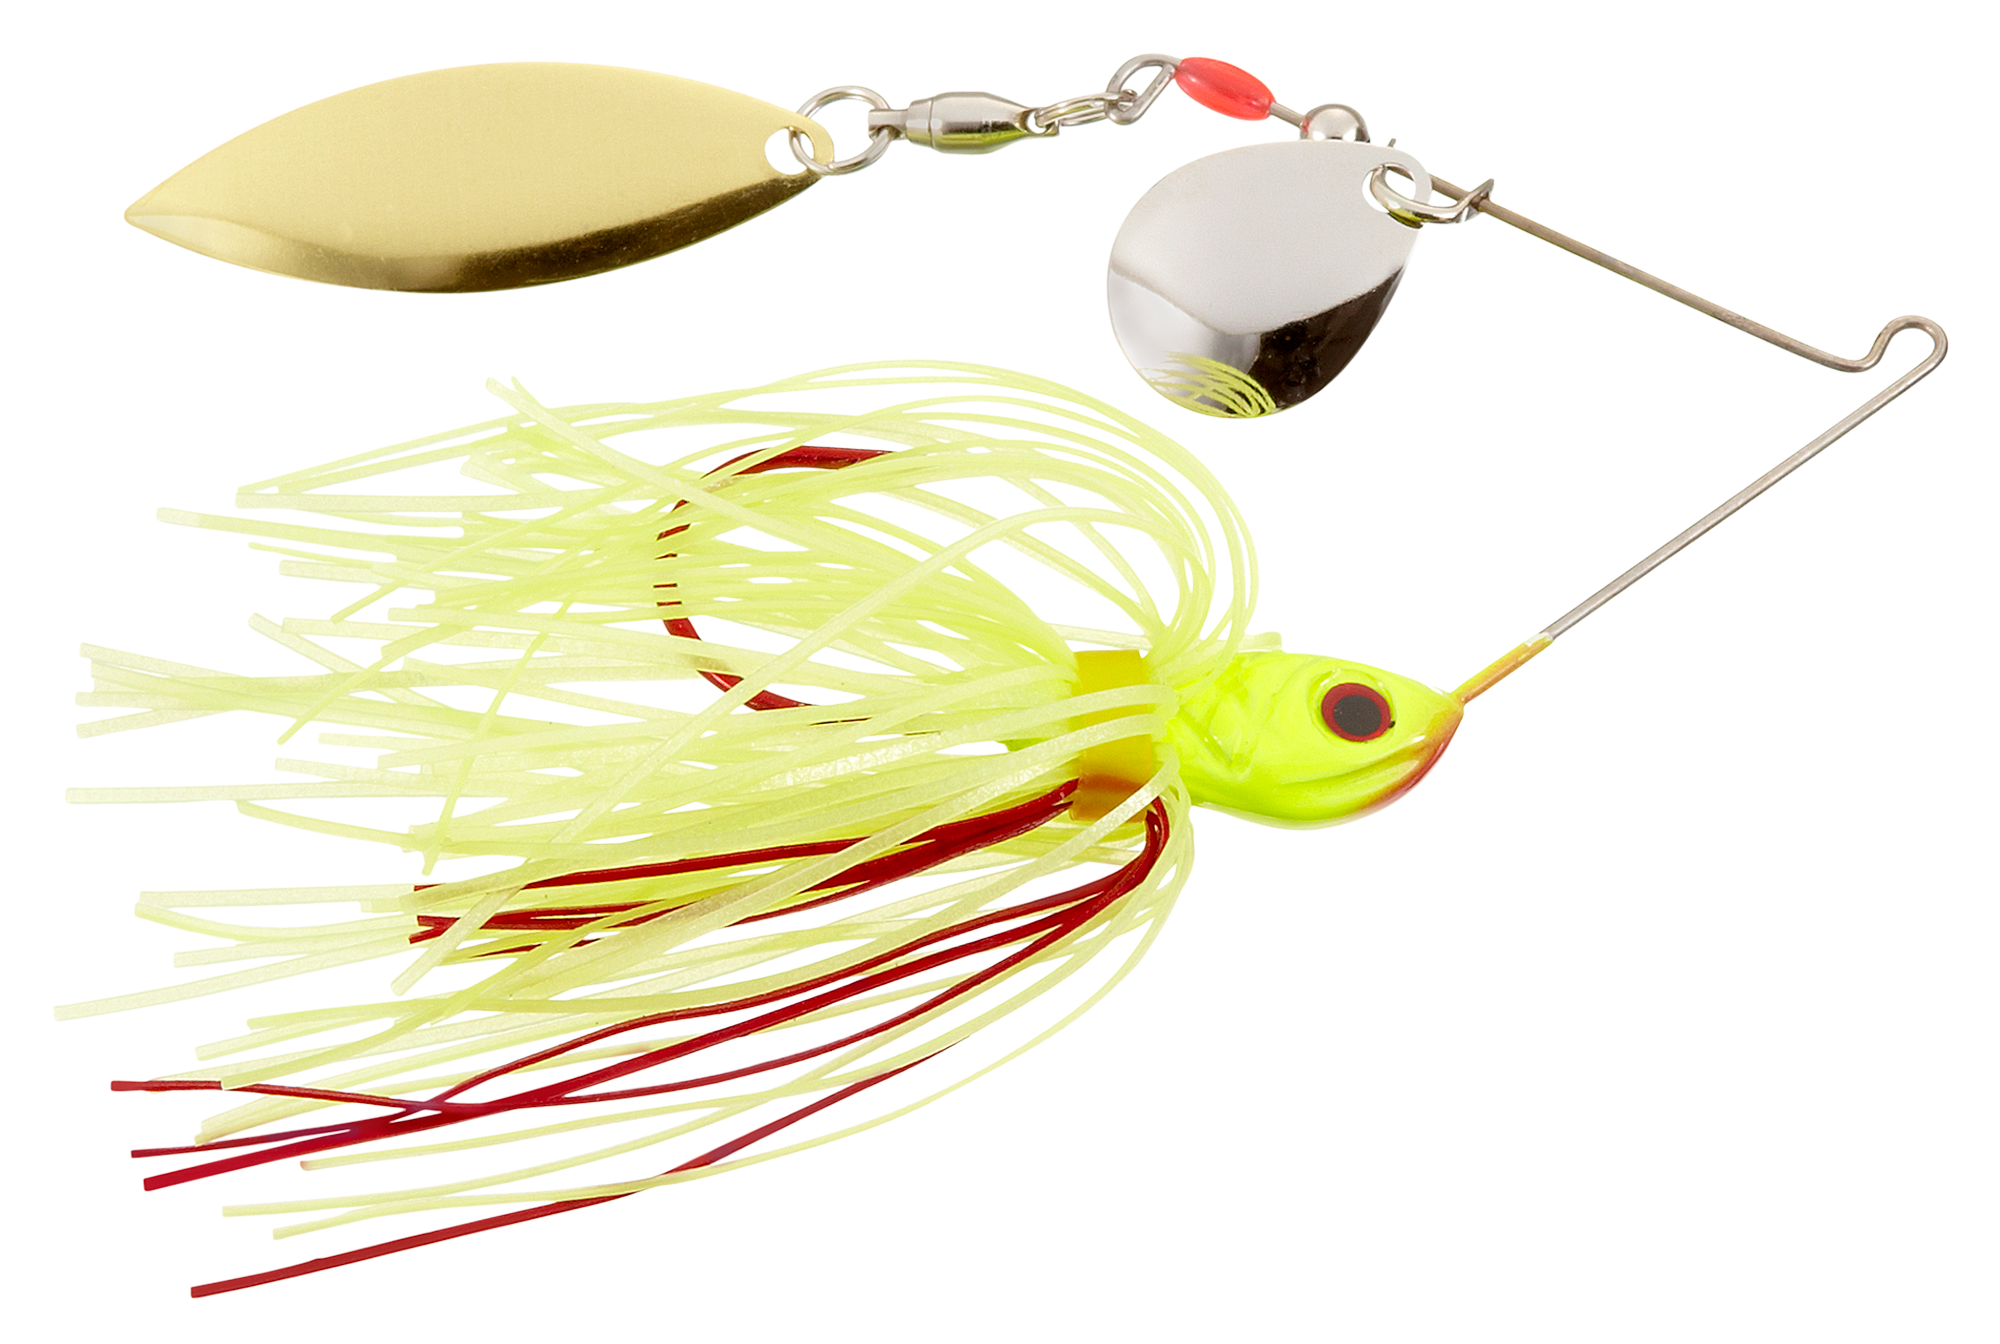 Mini-King Red Eyed Spinnerbait/Chartreuse, Spinners & Spinnerbaits -   Canada